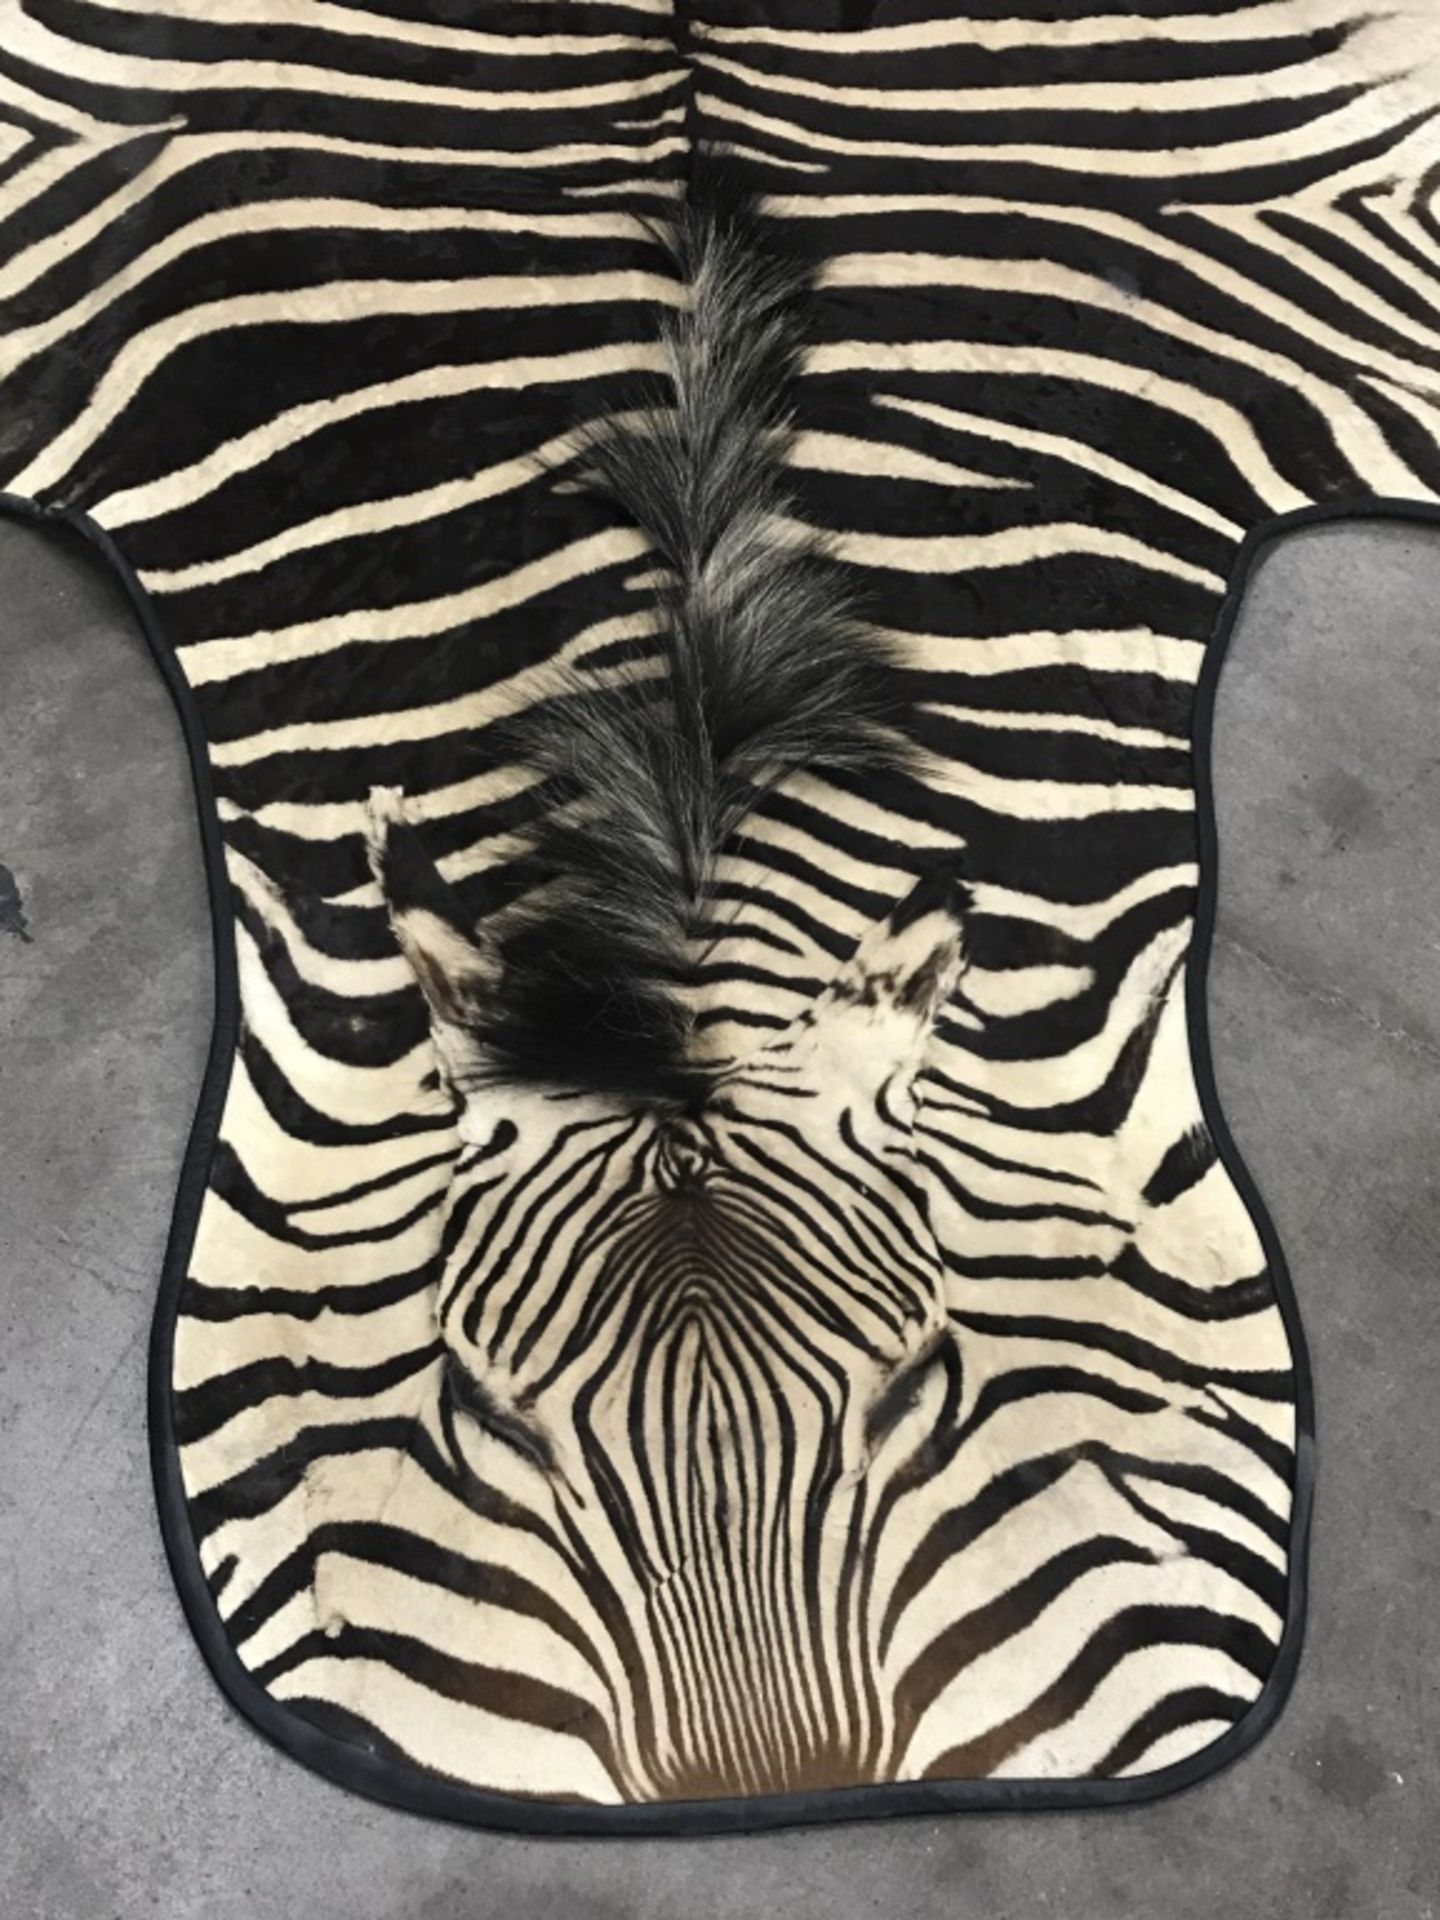 Very Nice Zebra Rug (TX Res. Only) - Image 7 of 13